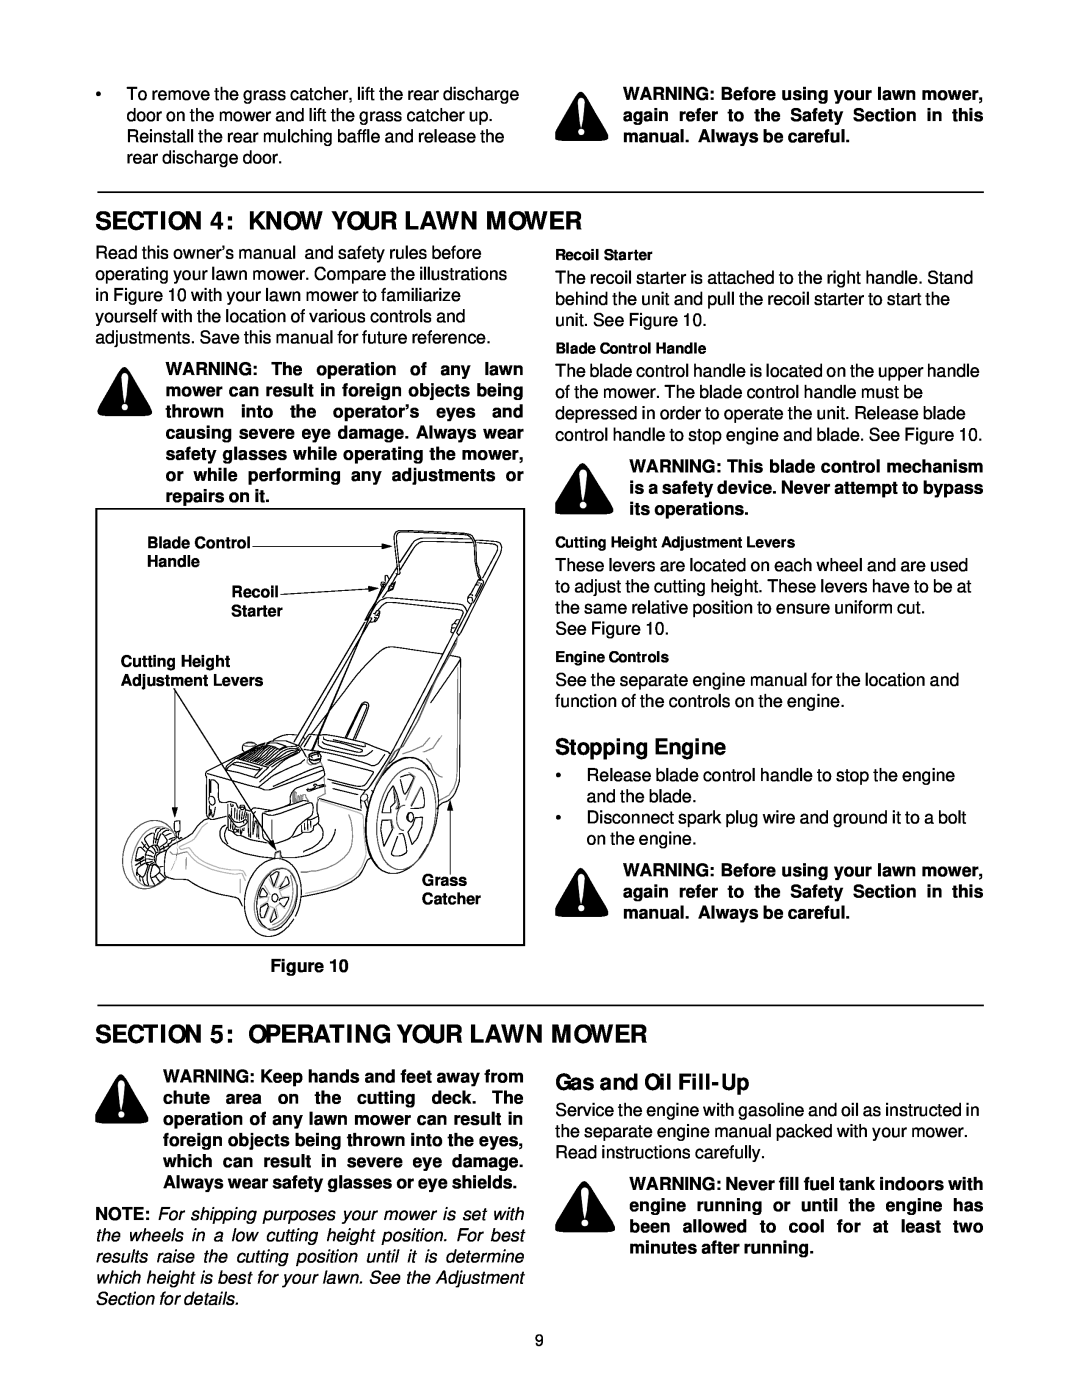 Yard-Man 11A-589 Series manual Know Your Lawn Mower, Operating Your Lawn Mower, Stopping Engine, Gas and Oil Fill-Up 